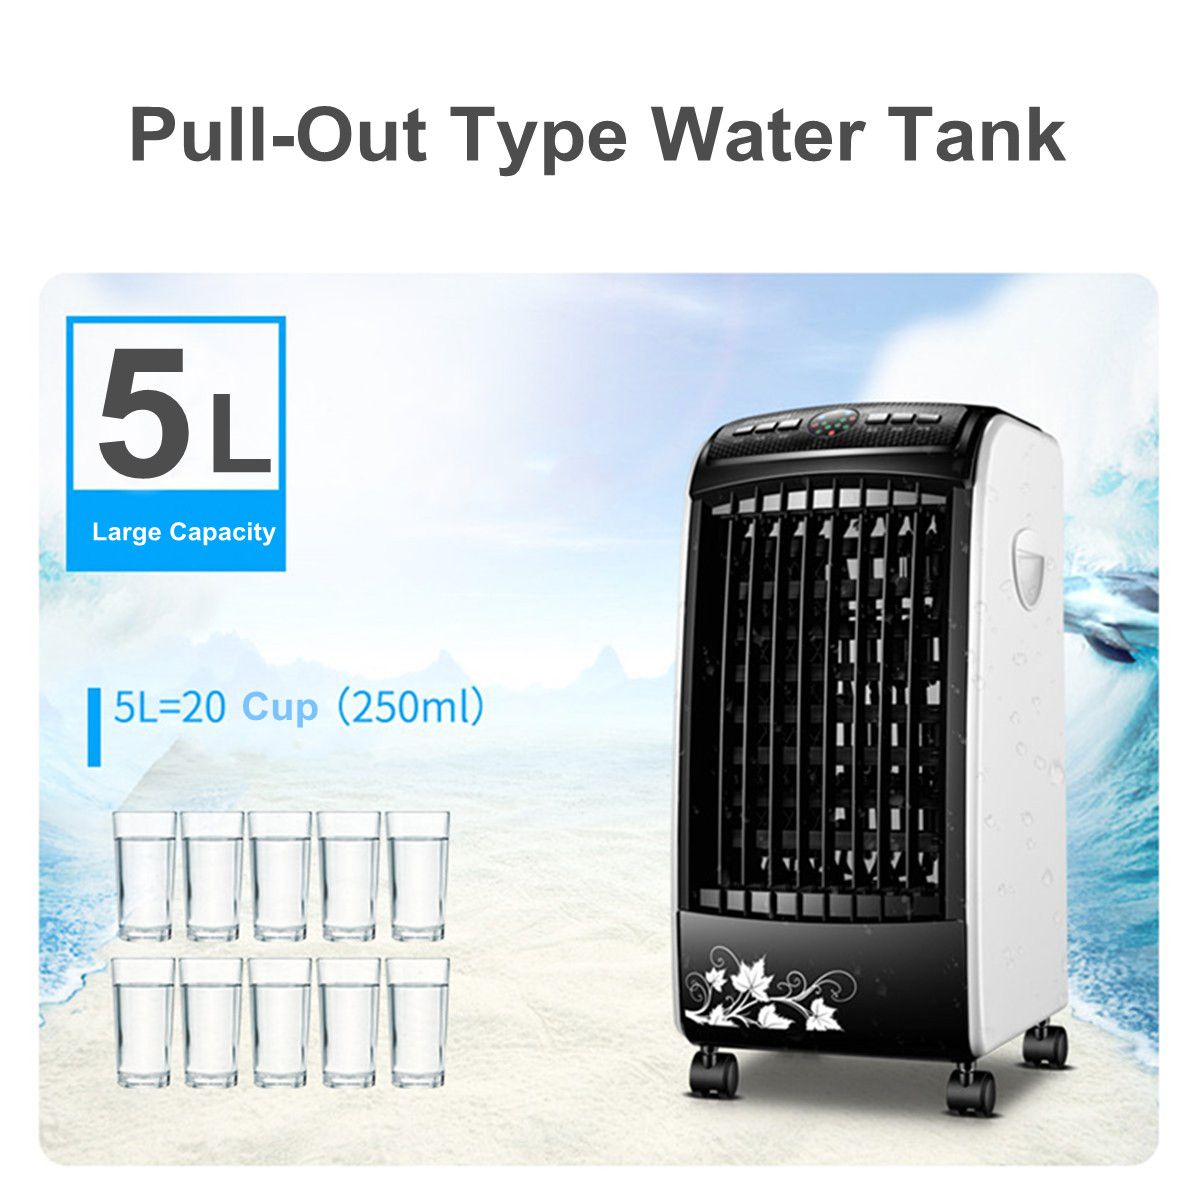 220V-Portable-Air-Conditioner-Air-Conditioning-Fan-Humidifier-Cooler-Cooling-System-1317048